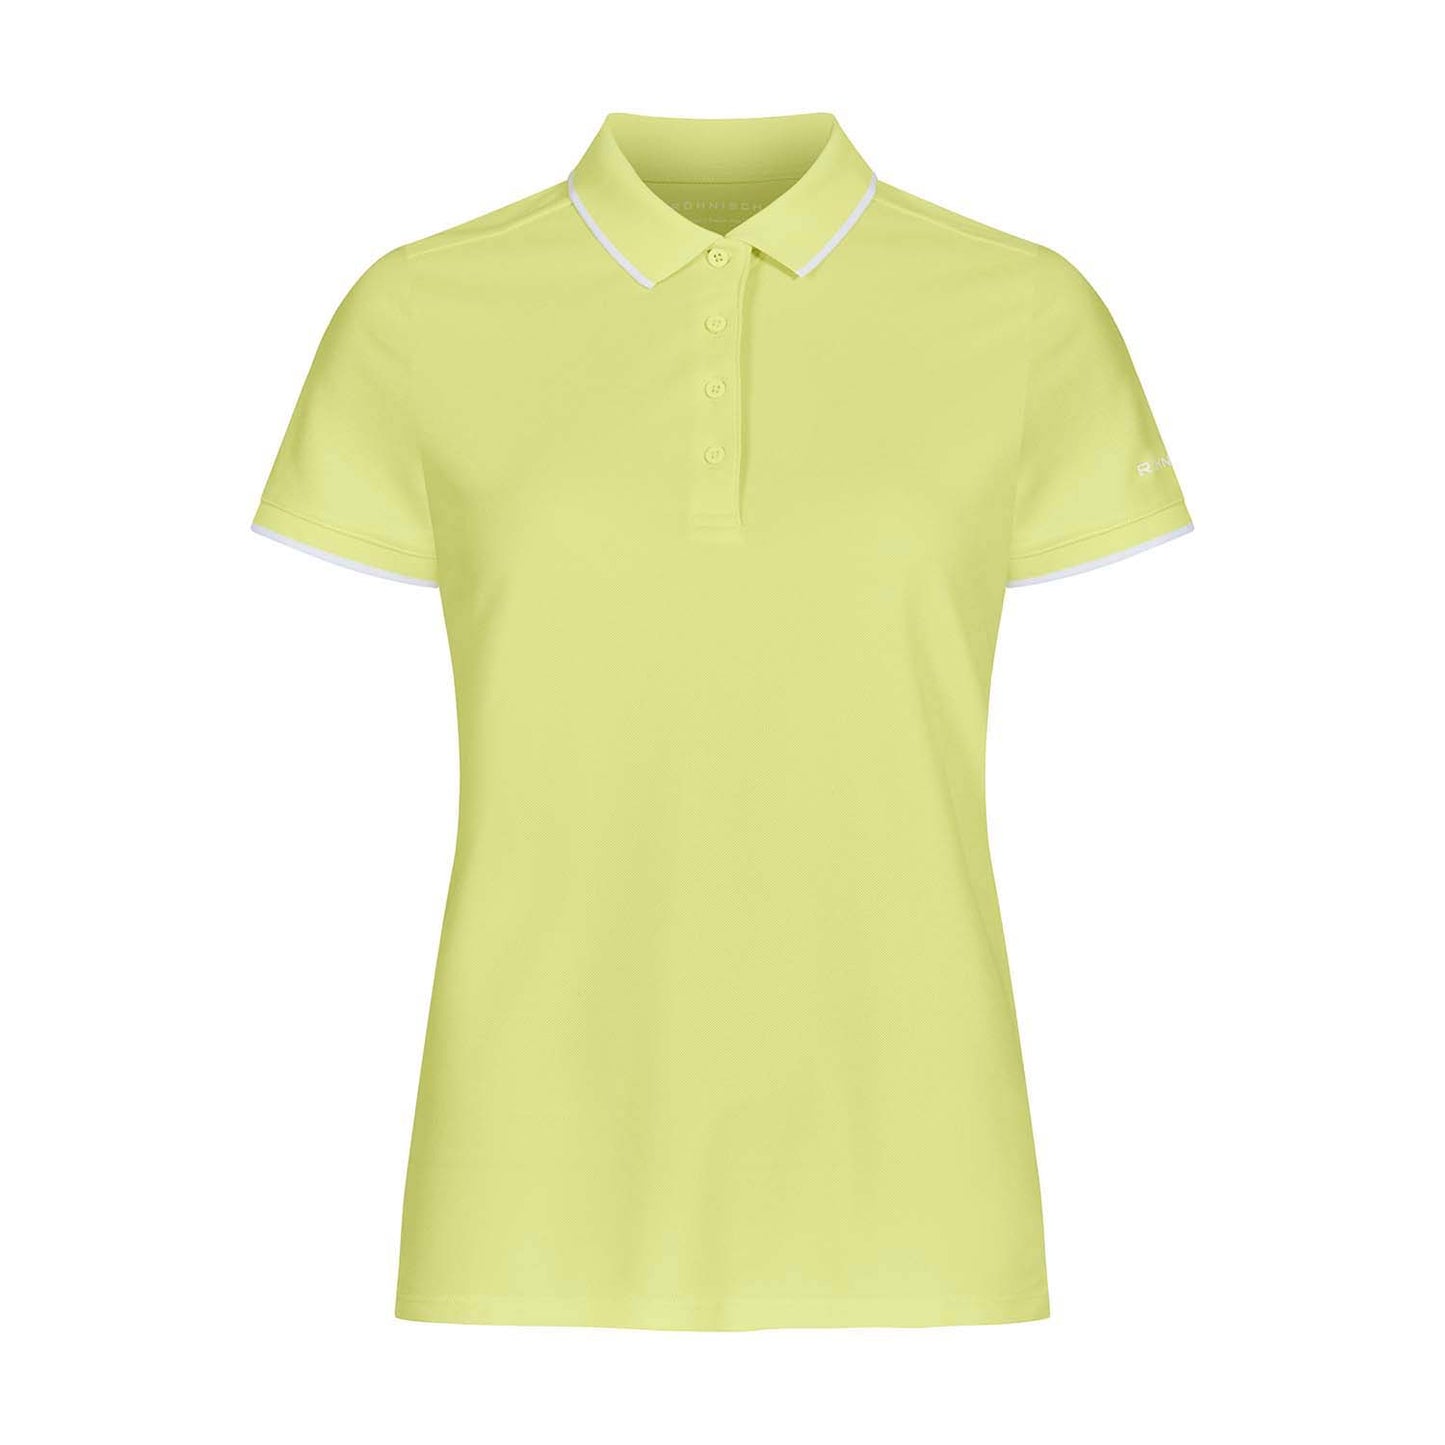 Rohnisch Ladies Classic Polo Shirt with Contrast Trim in Sunny Lime